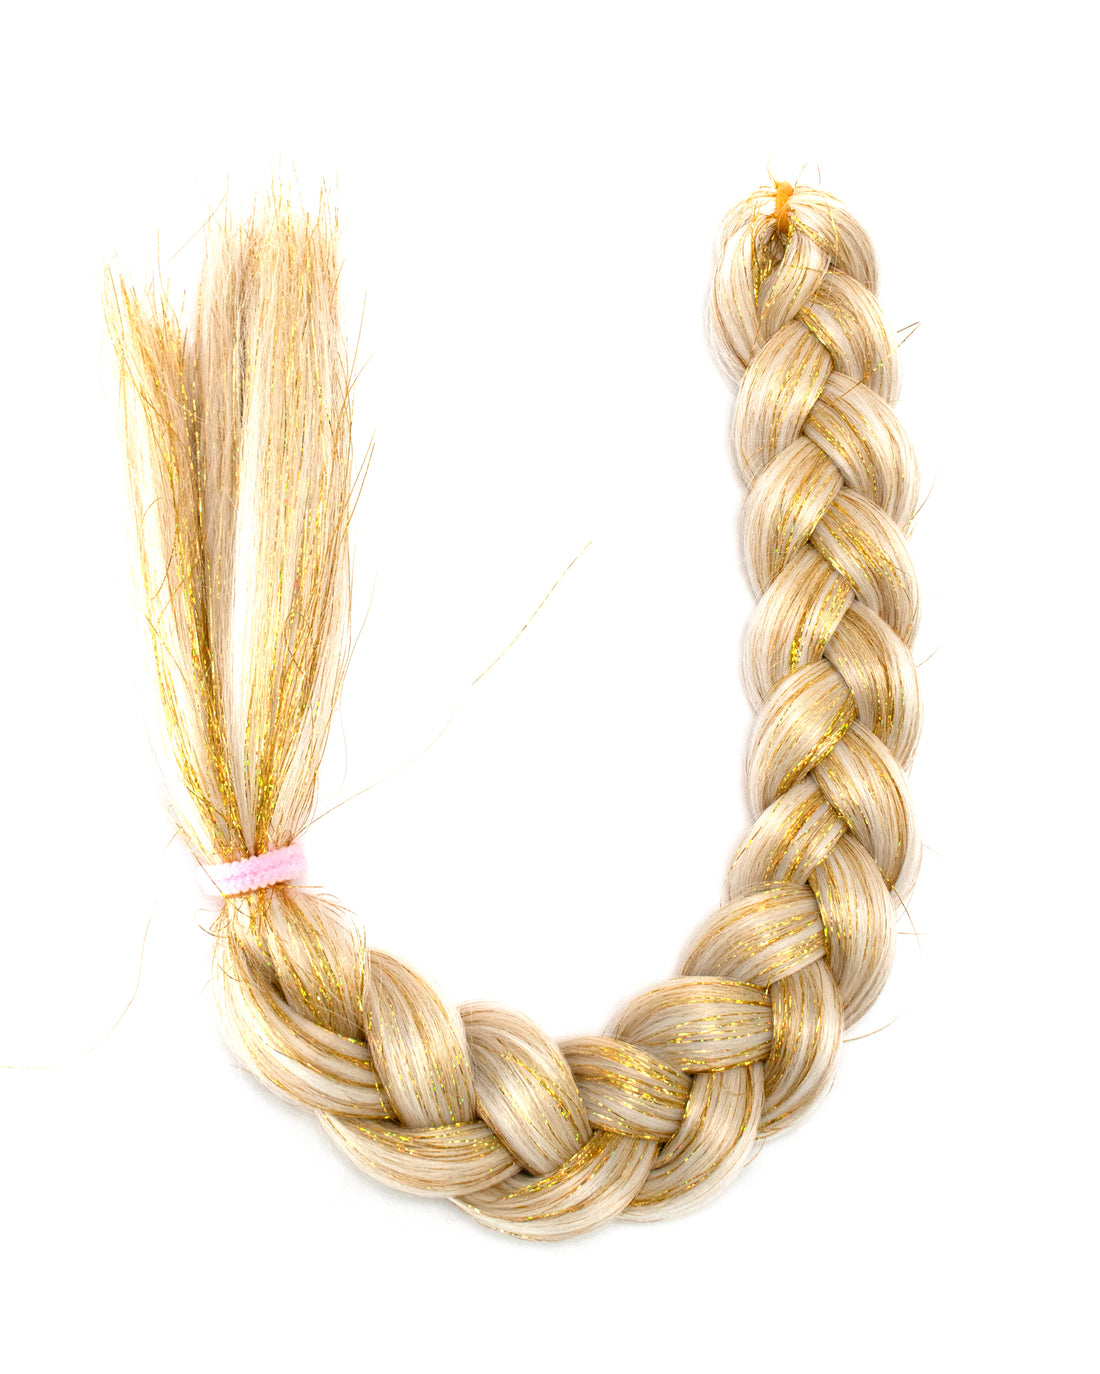 Jackpot - Platinum Blonde and Gold Hair Extension with Tinsel - Lunautics Braid-In Hair